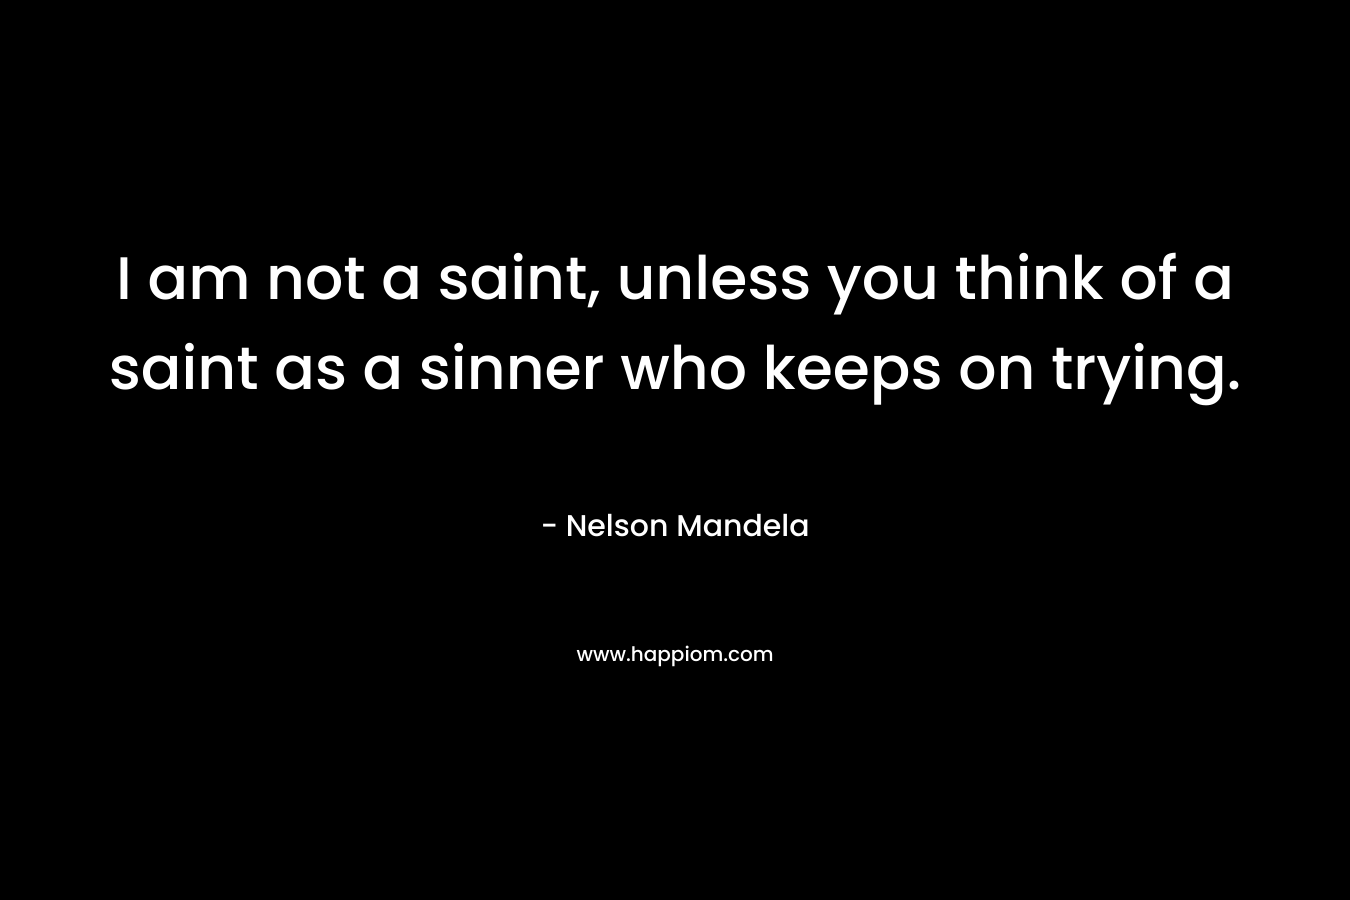 I am not a saint, unless you think of a saint as a sinner who keeps on trying.